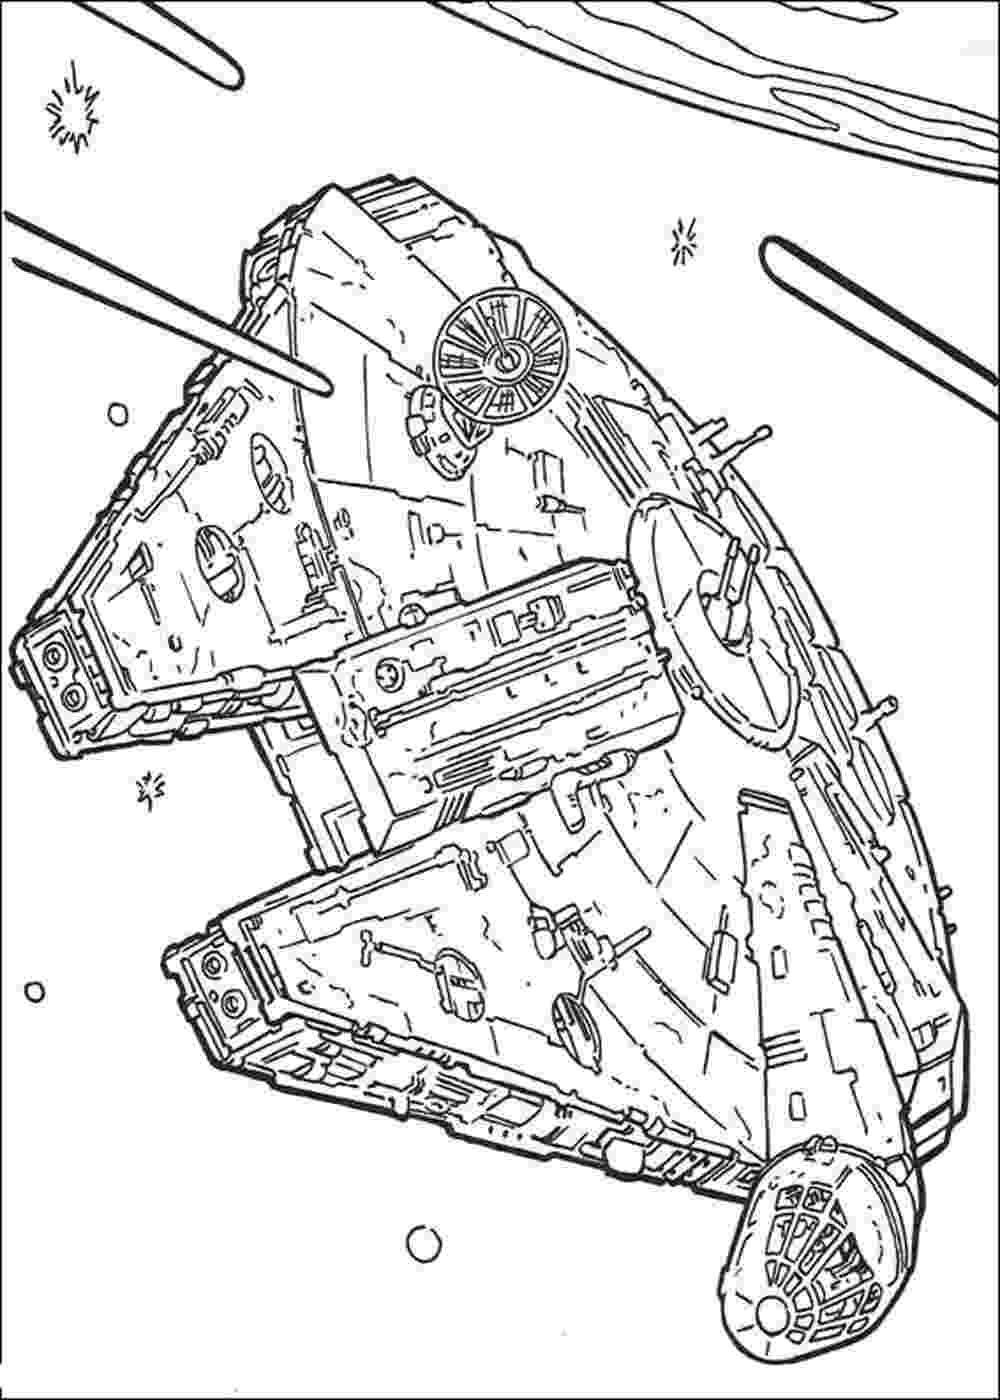 lego star wars pictures to colour lego star wars coloring pages bestappsforkidscom to colour star pictures wars lego 